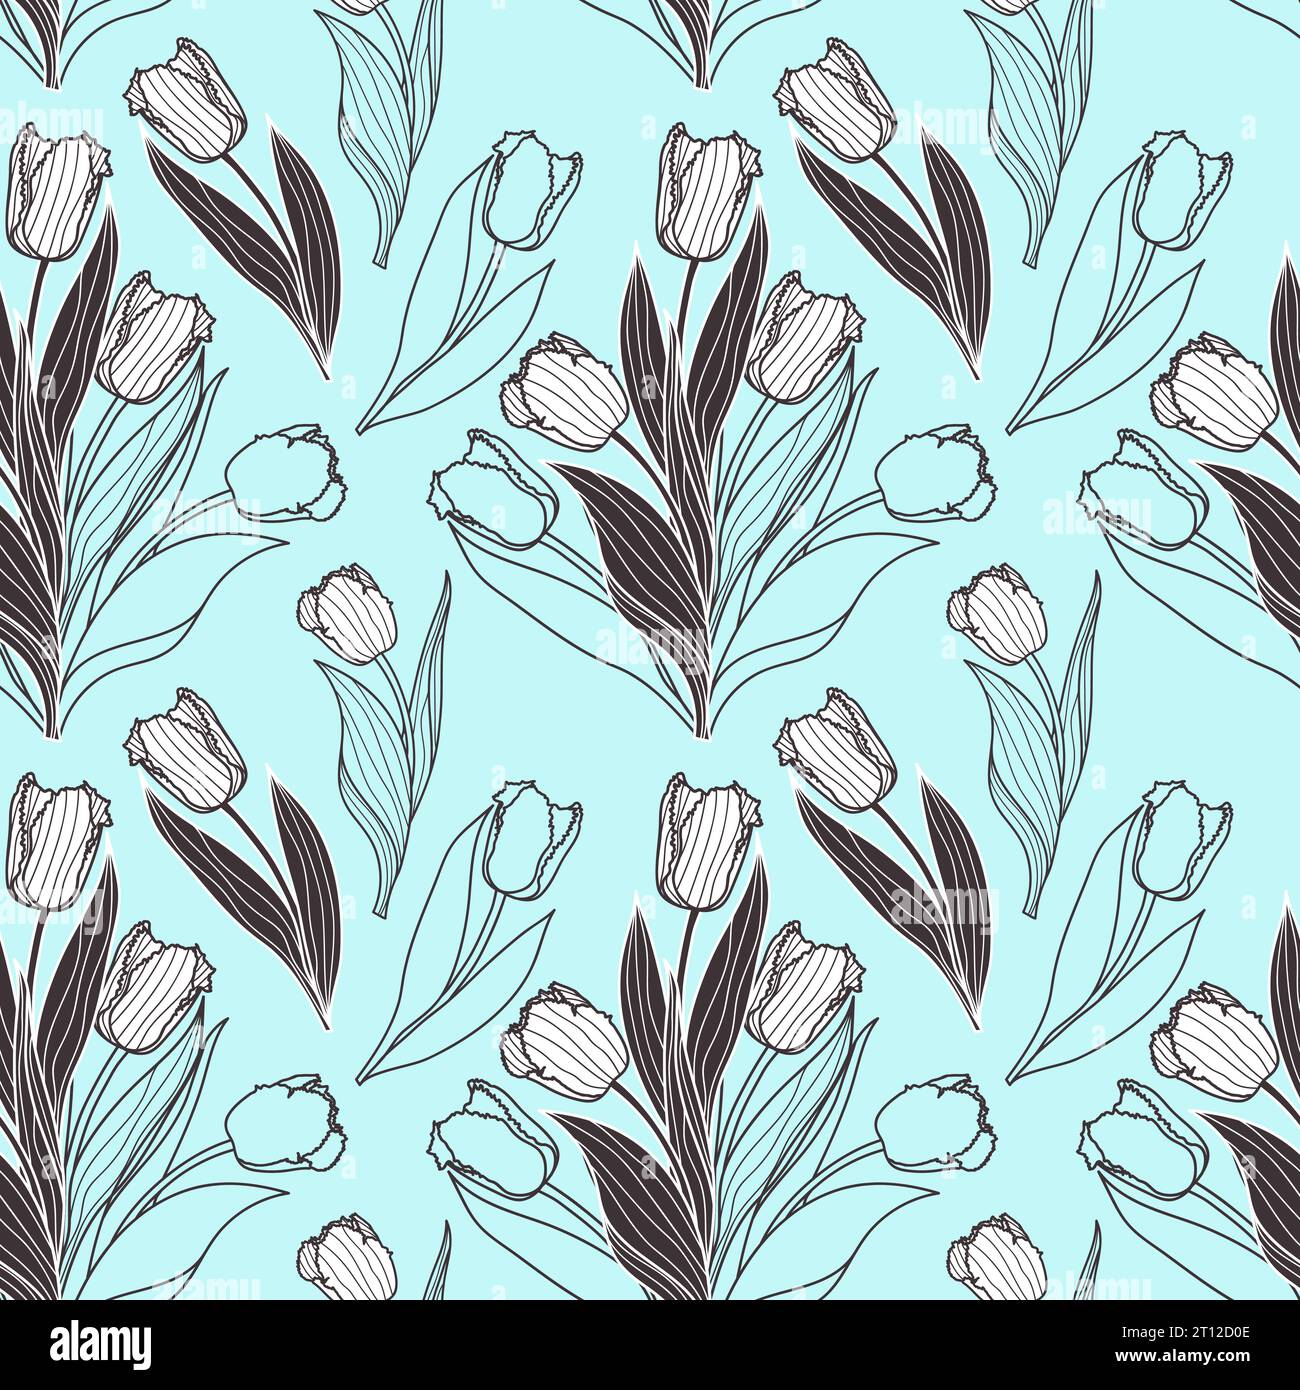 Vector seamless pattern with tulip flowers. Spring floral background, wallpaper, textile design with tulip outlines , silhouettes in black and white c Stock Vector